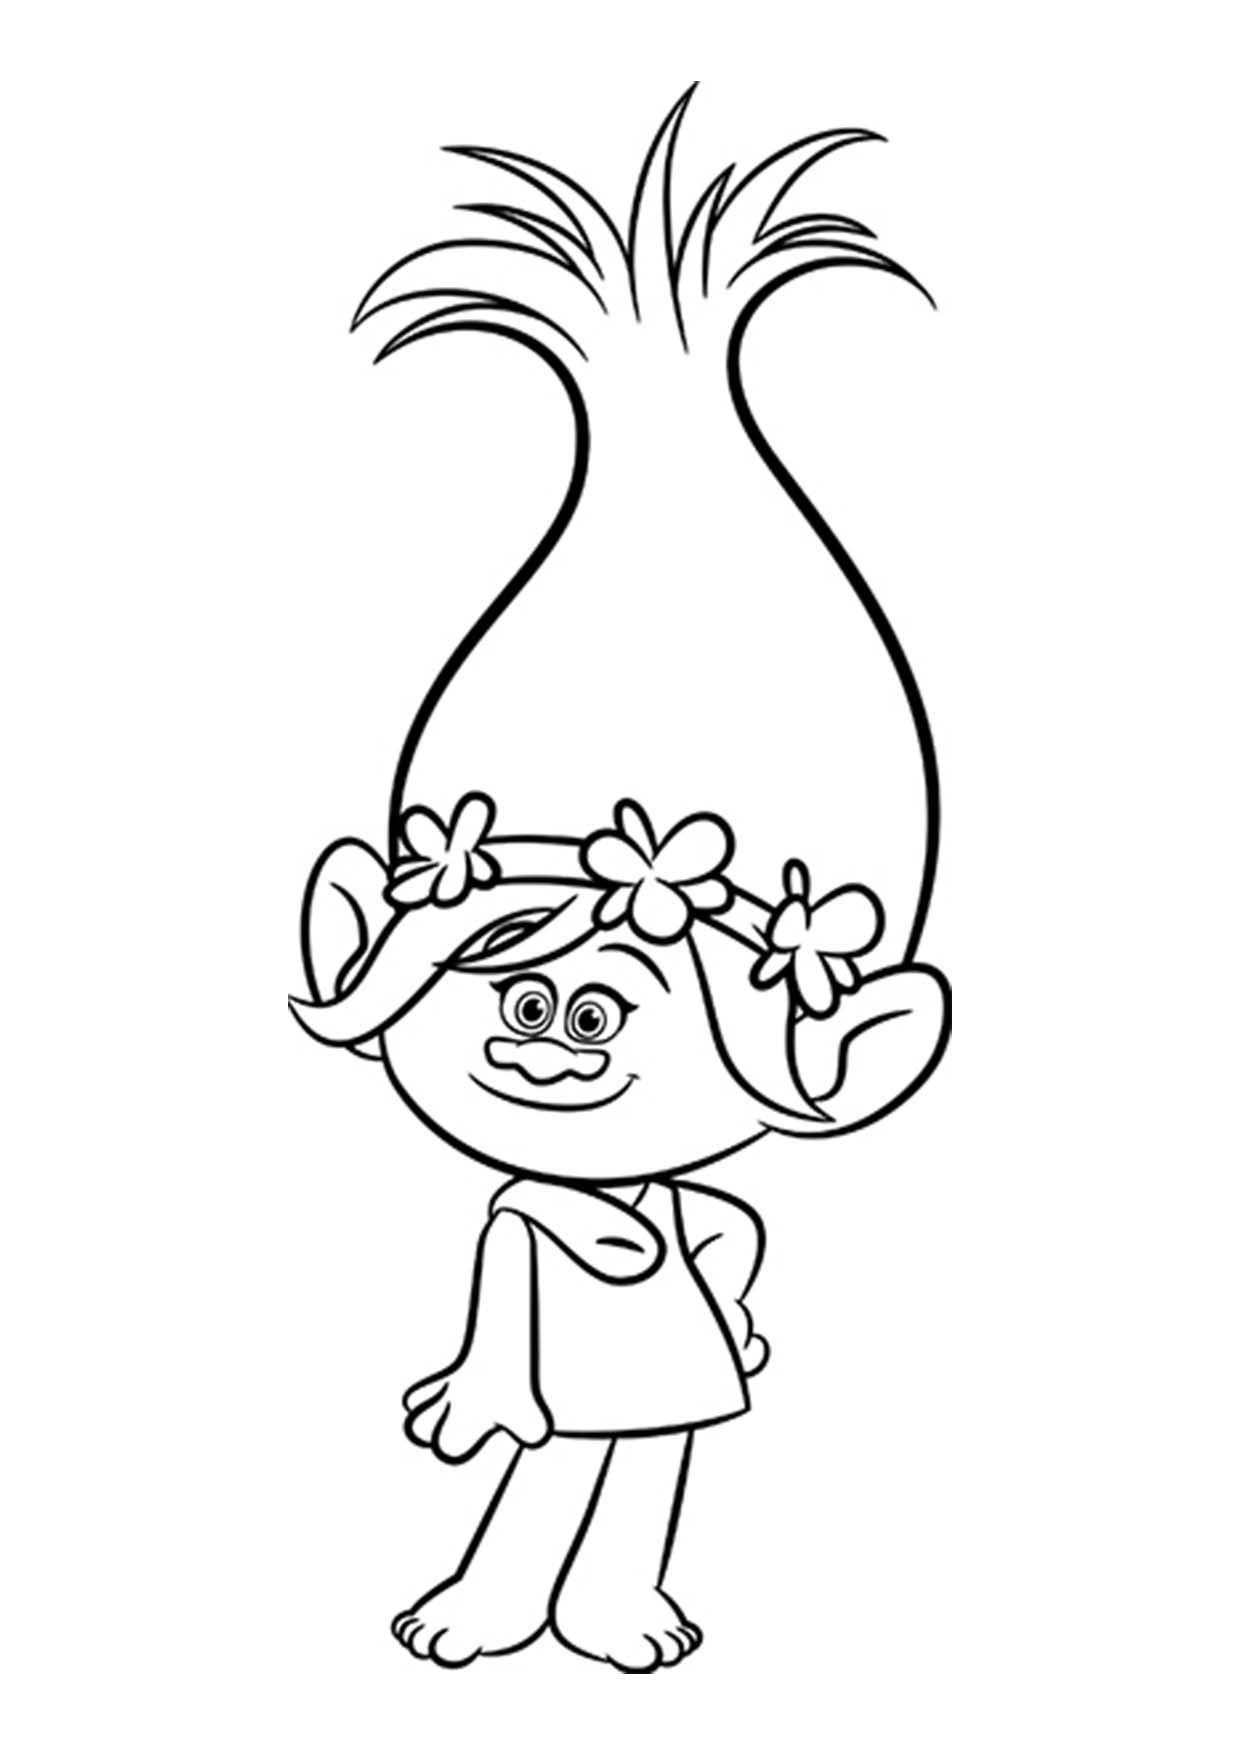 Troll Dessin Beau Collection Coloriage Les Trolls Poppy toujours souriante